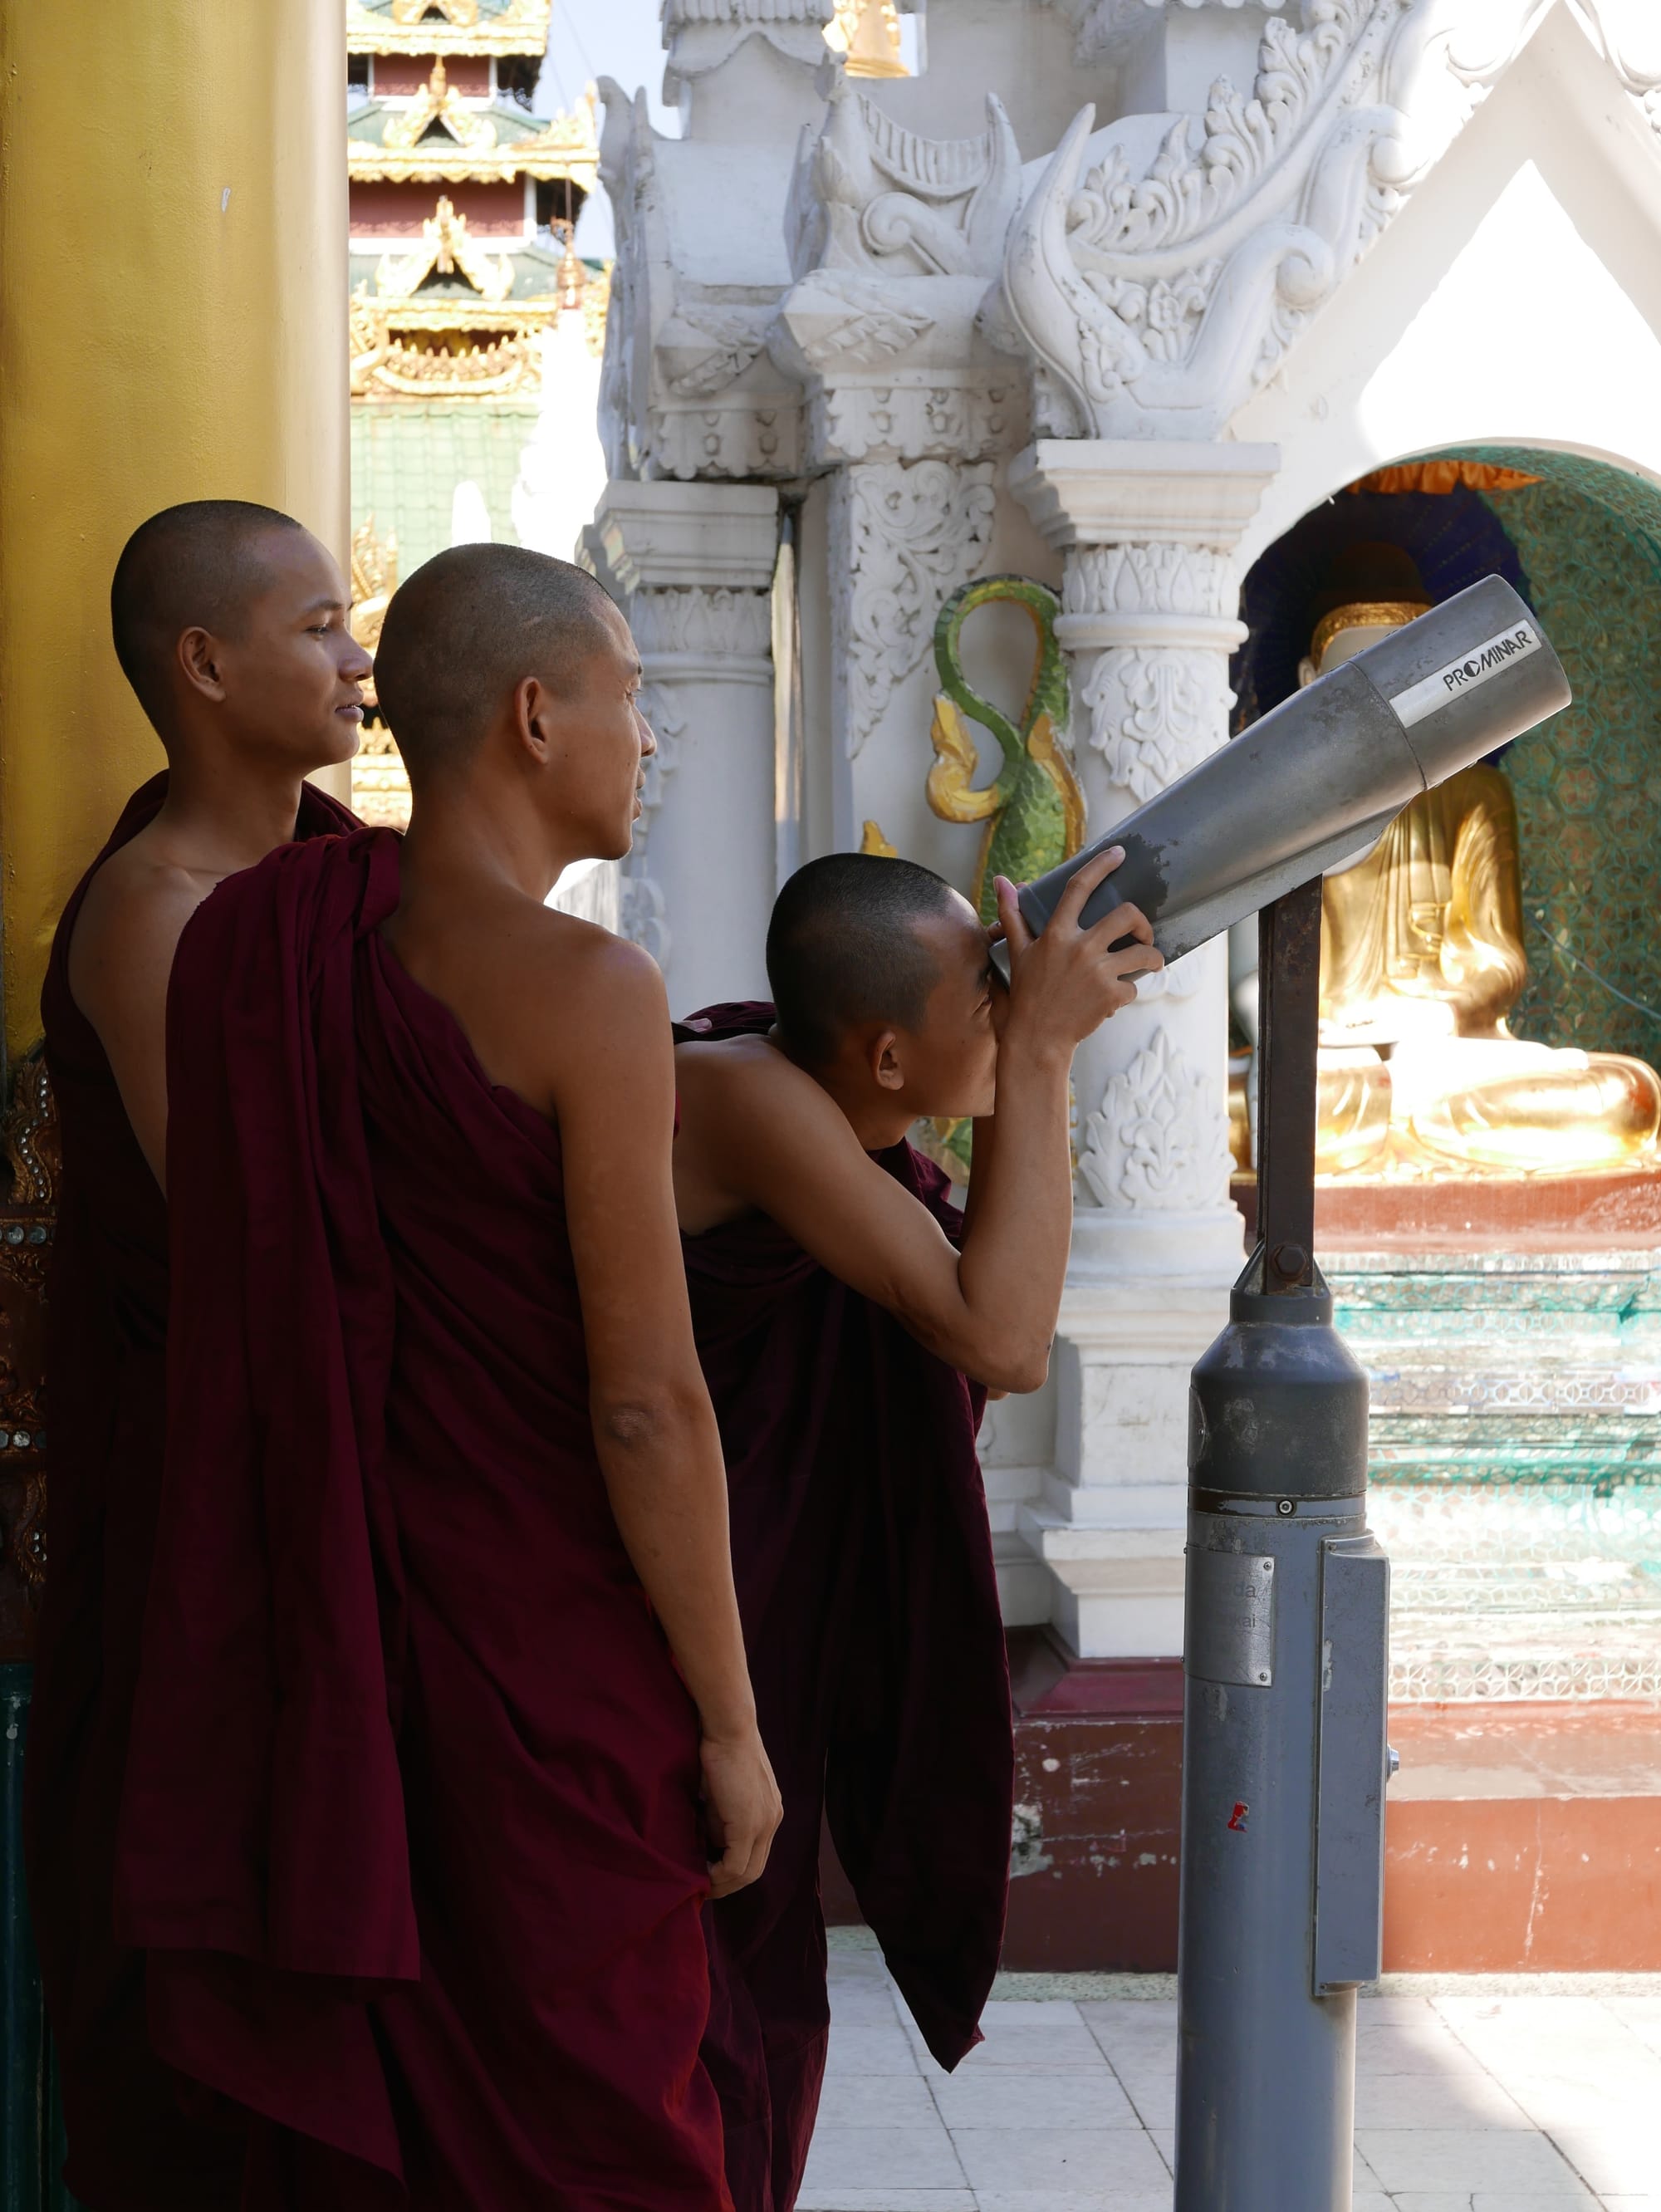 Photo by Author — monks of Myanmar